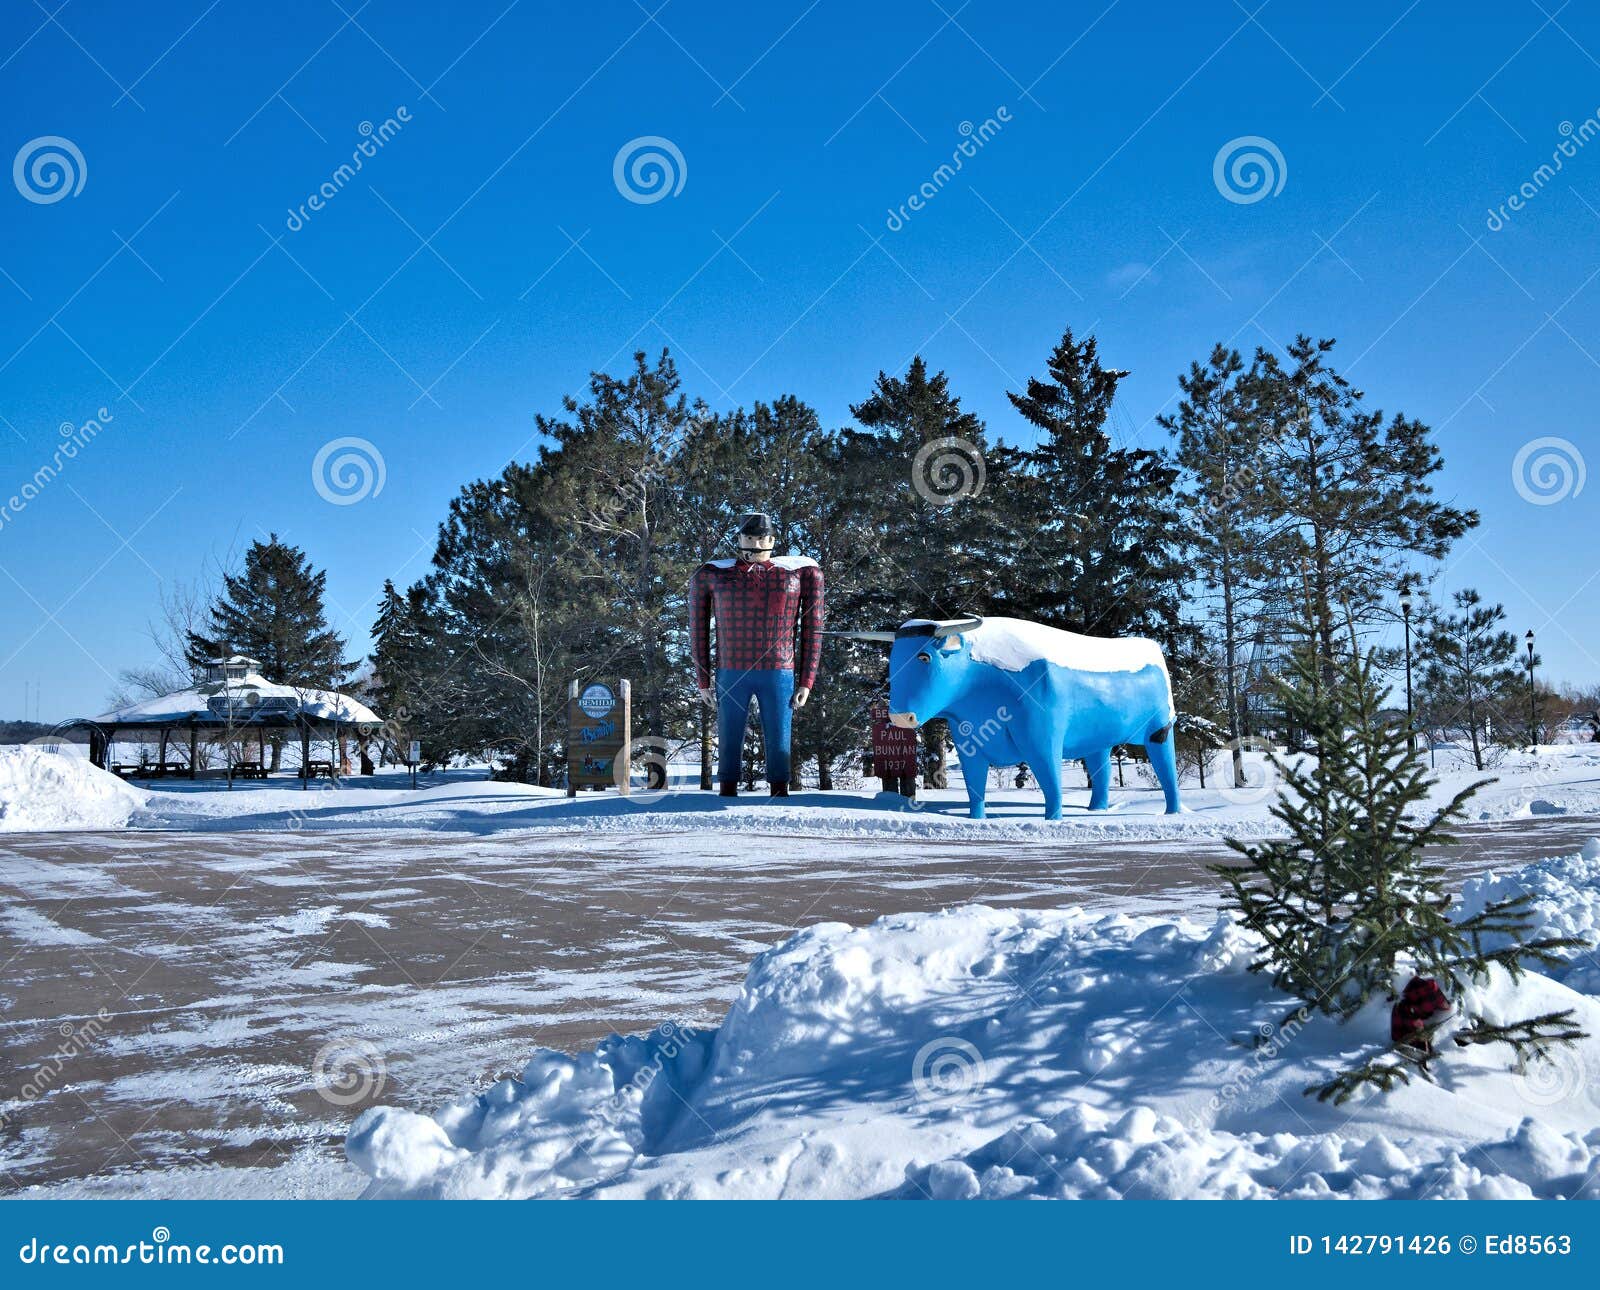 Giant Lumberjack Photos - Free & Royalty-Free Stock Photos from Dreamstime